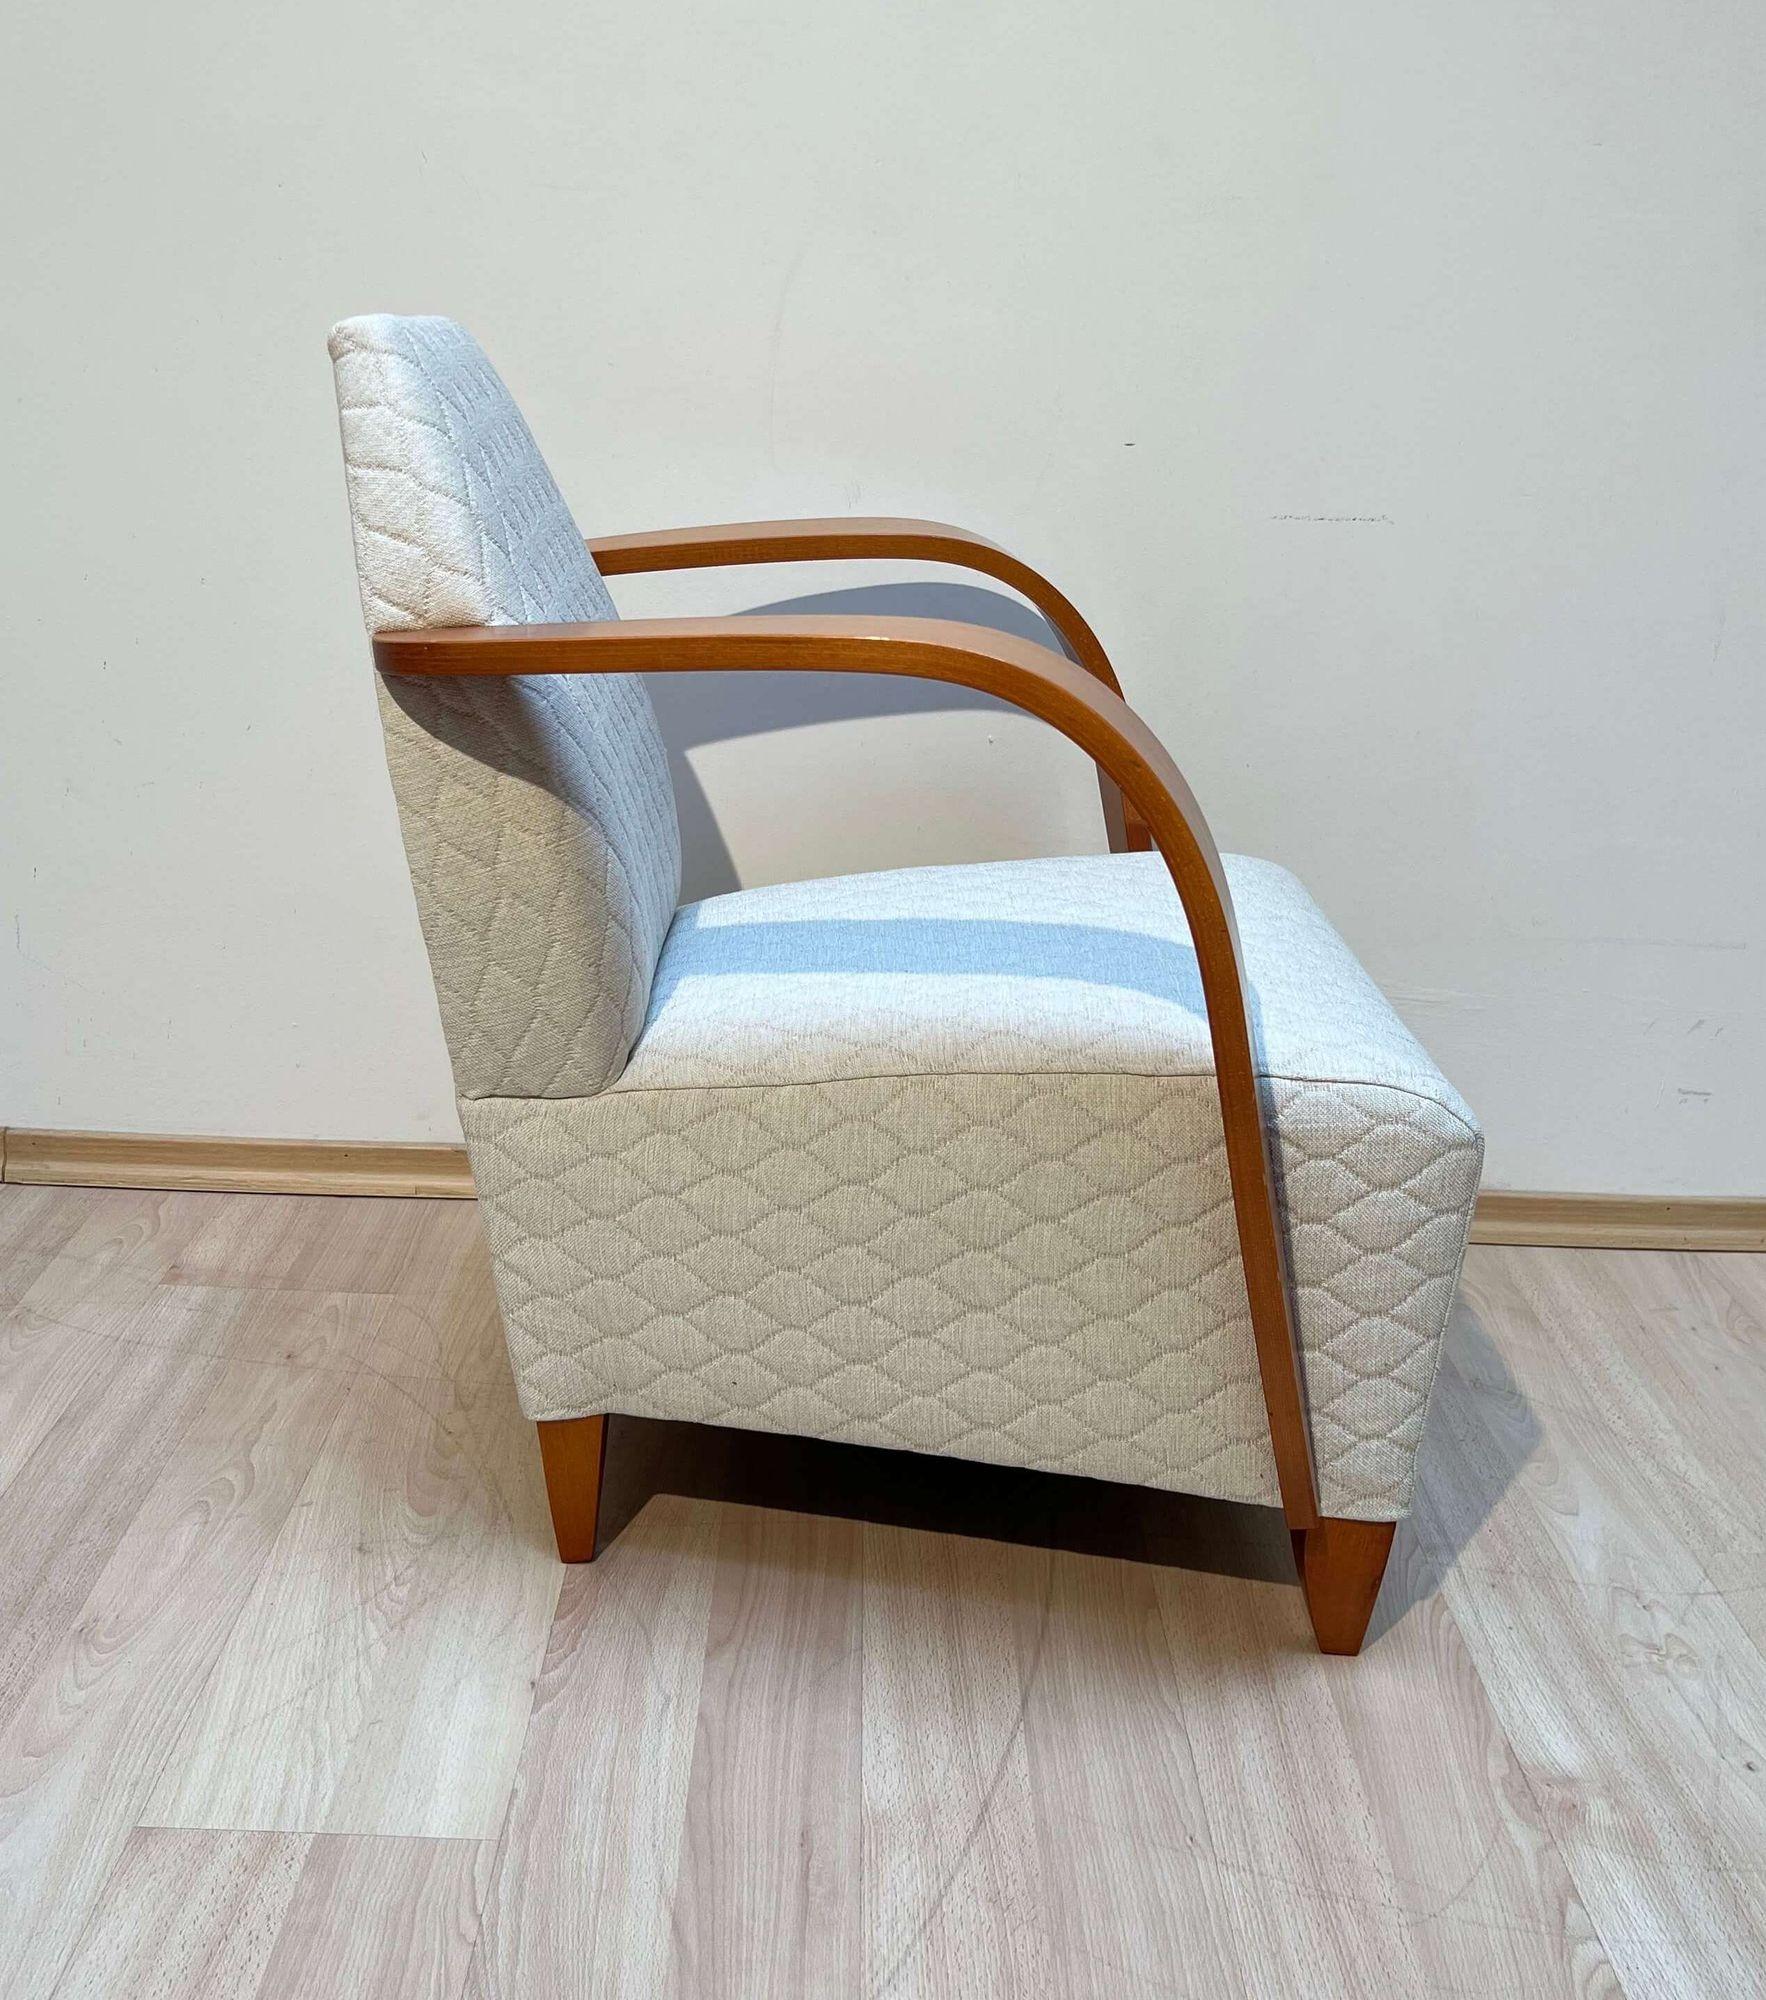 Design Arm Chair, Beech Wood, Cream-white Quilt Fabric, Spain, 1990s In Good Condition For Sale In Regensburg, DE